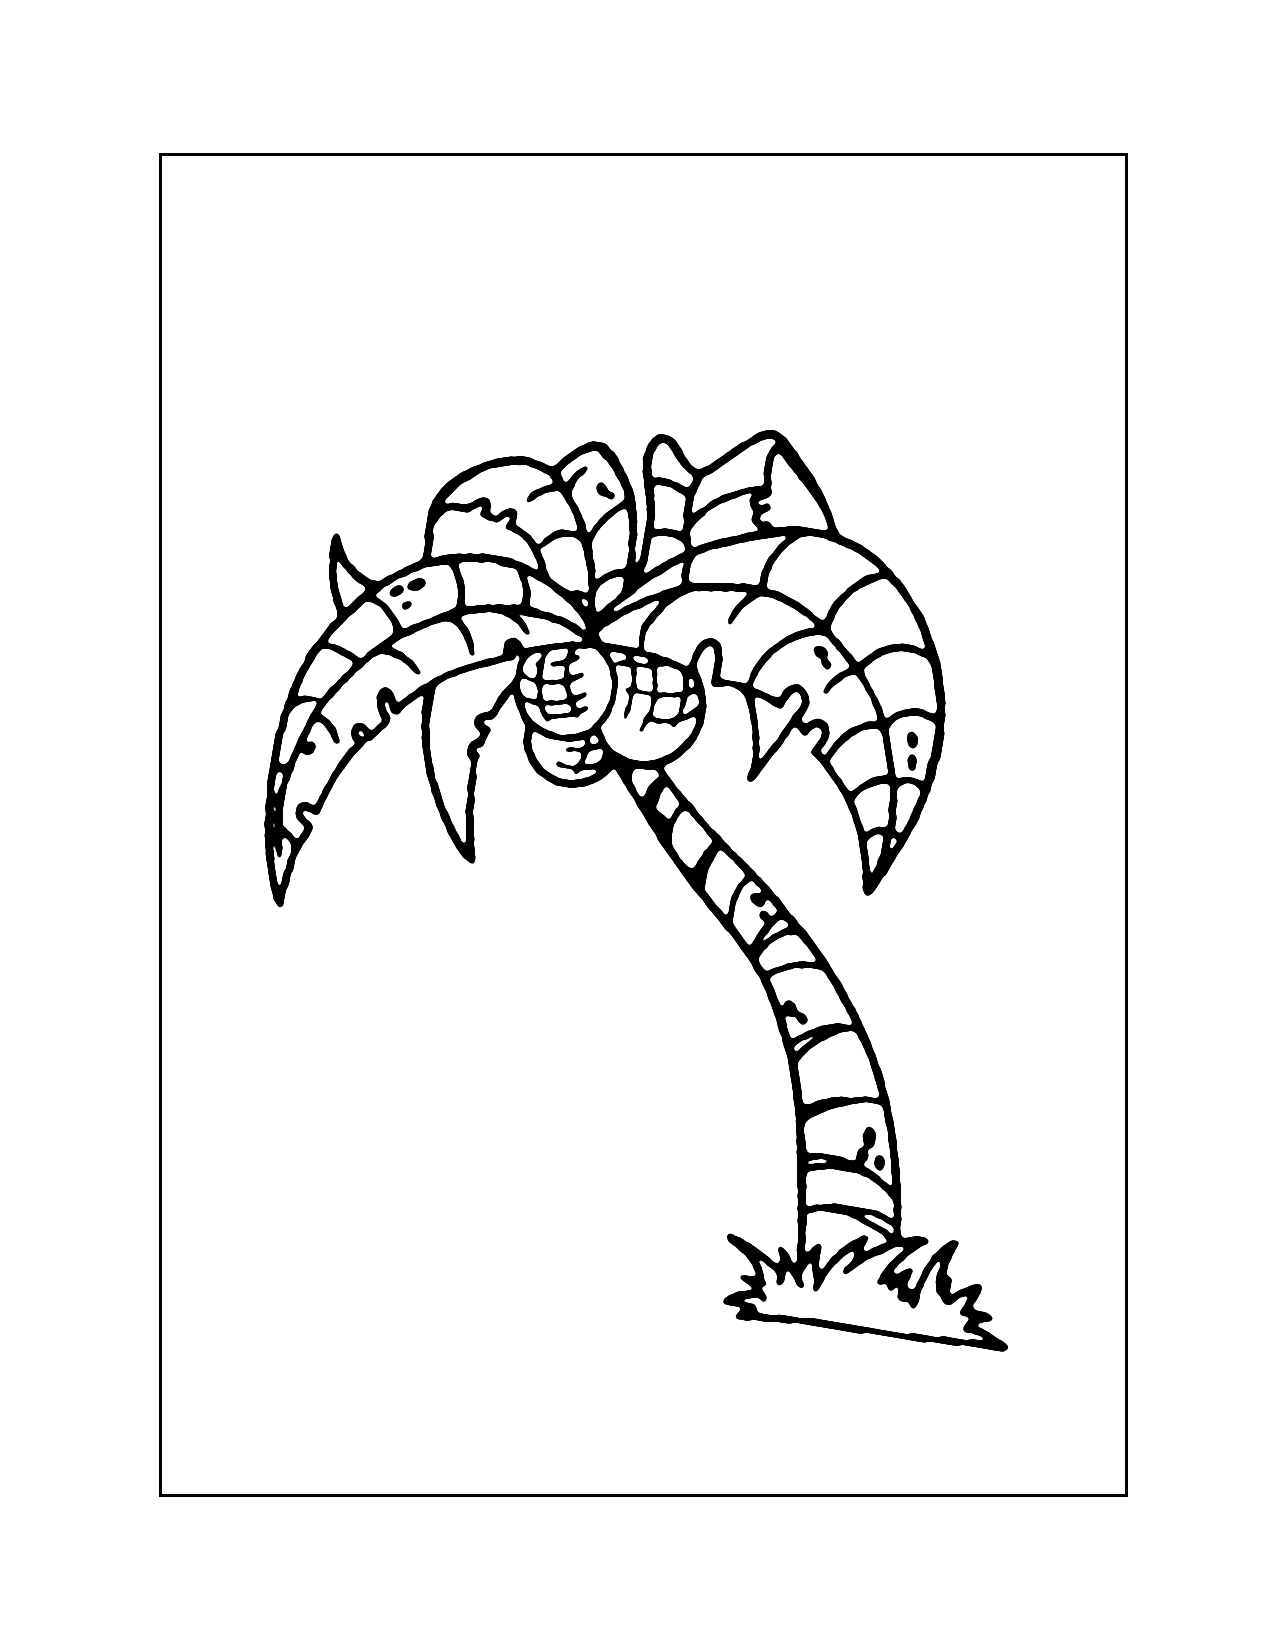 Coconut Tree Coloring Page